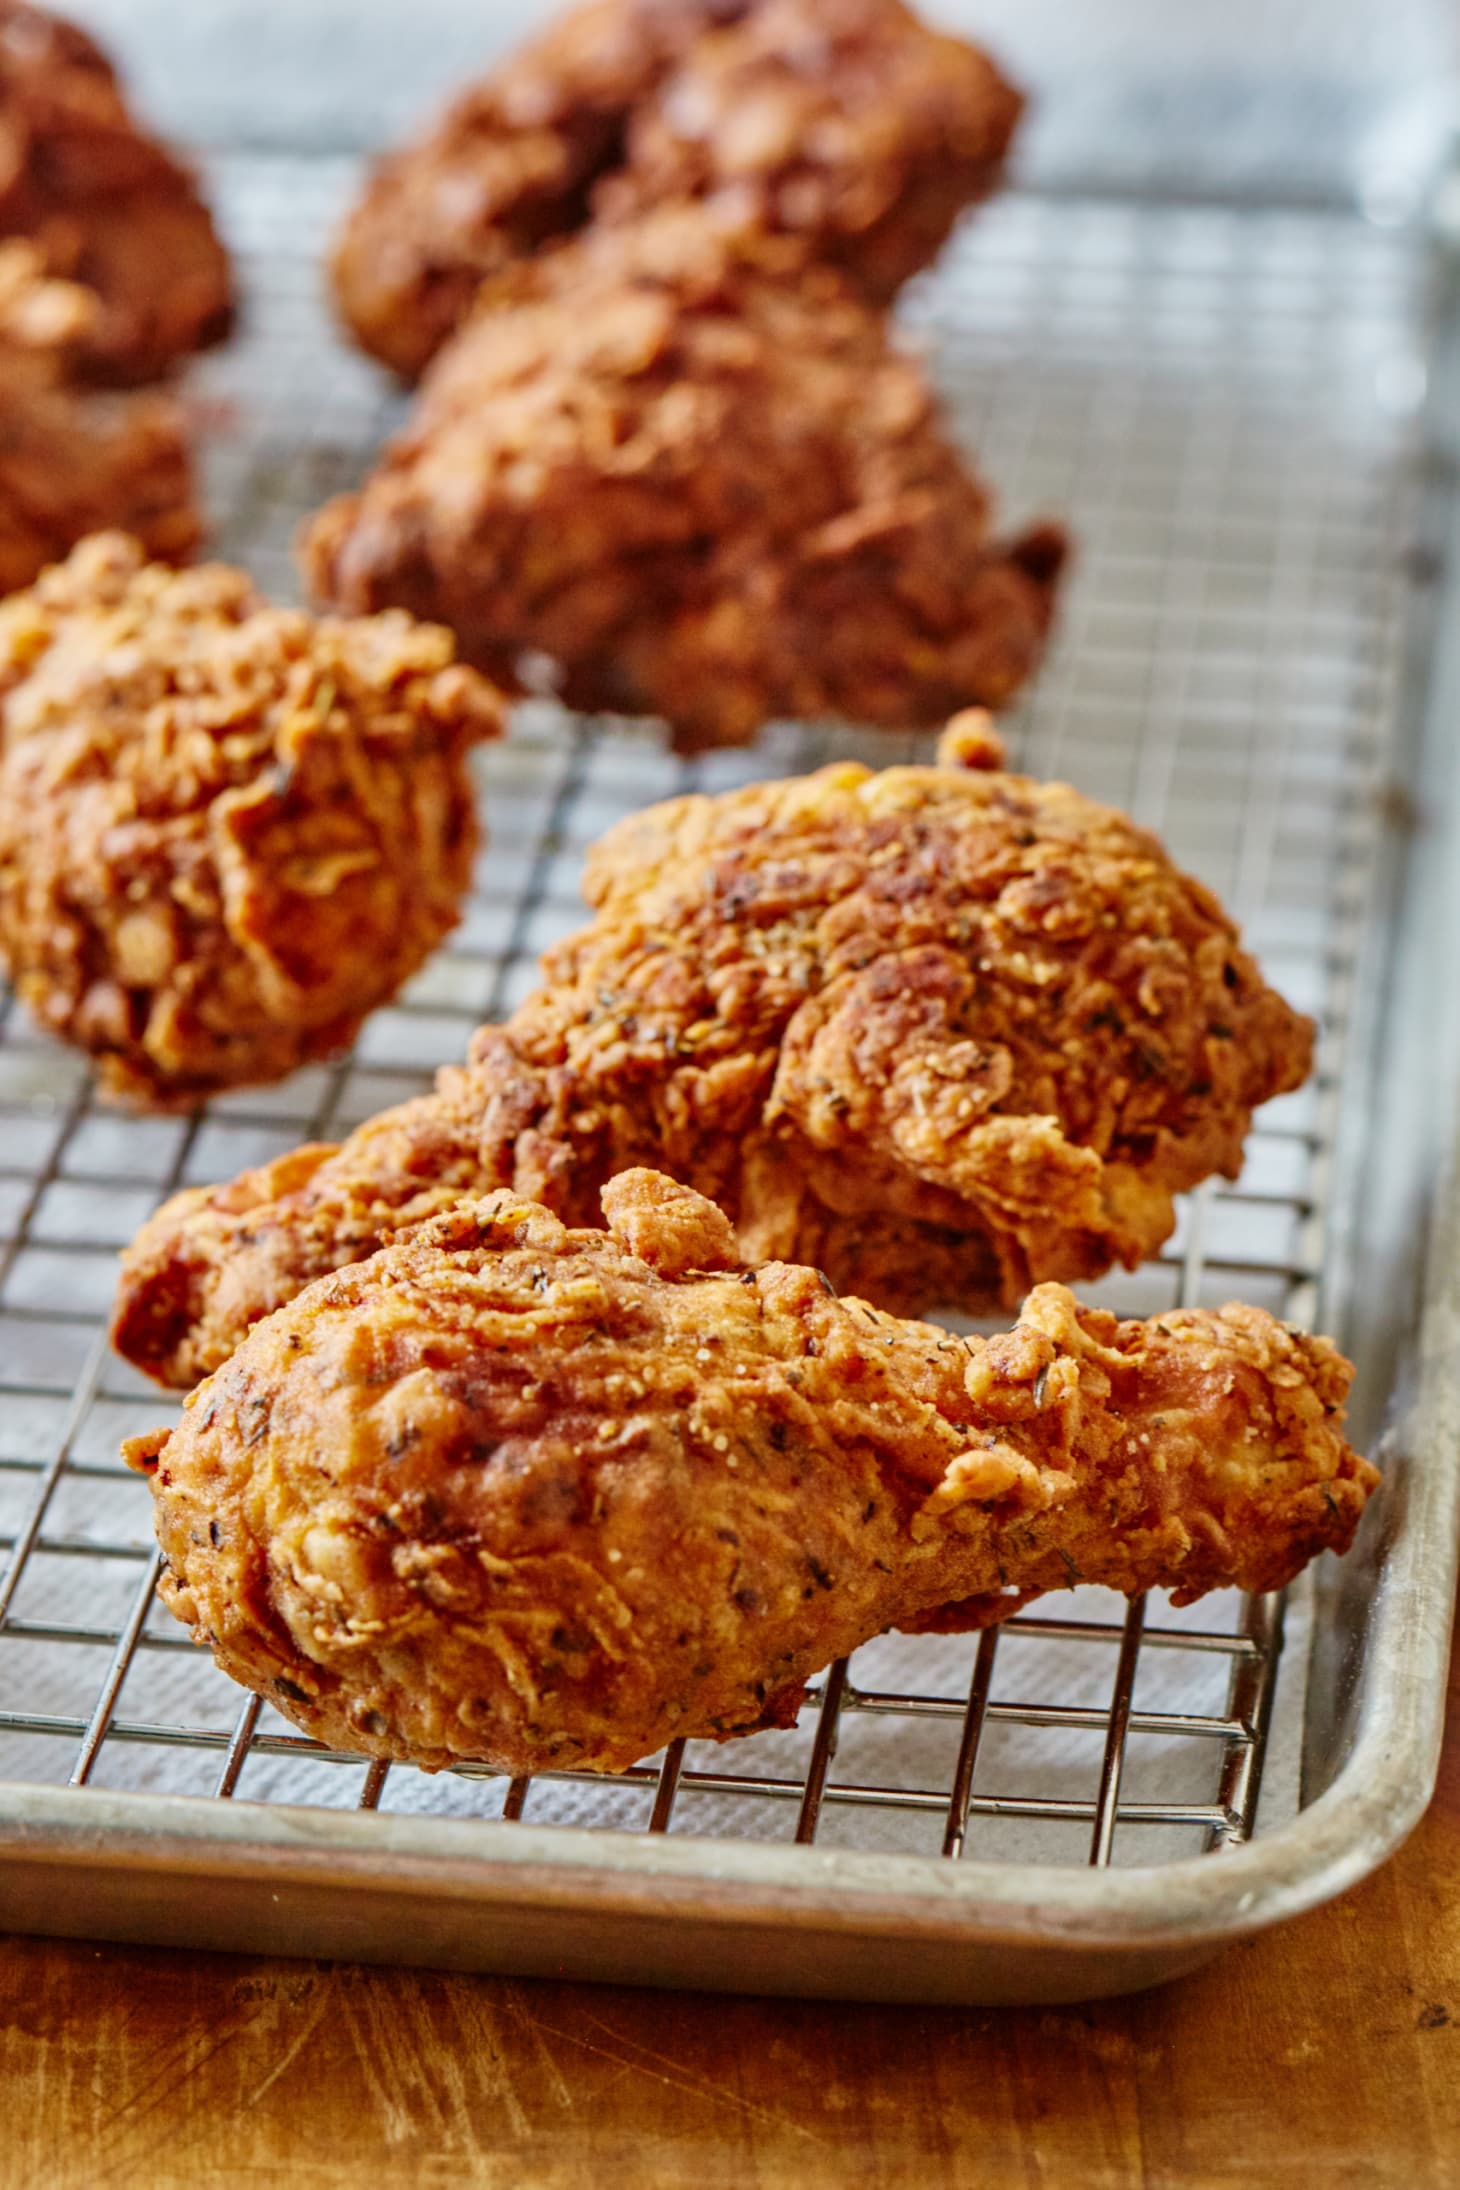 How To Make Crispy, Juicy Fried Chicken (That’s Better Than KFC) | Kitchn